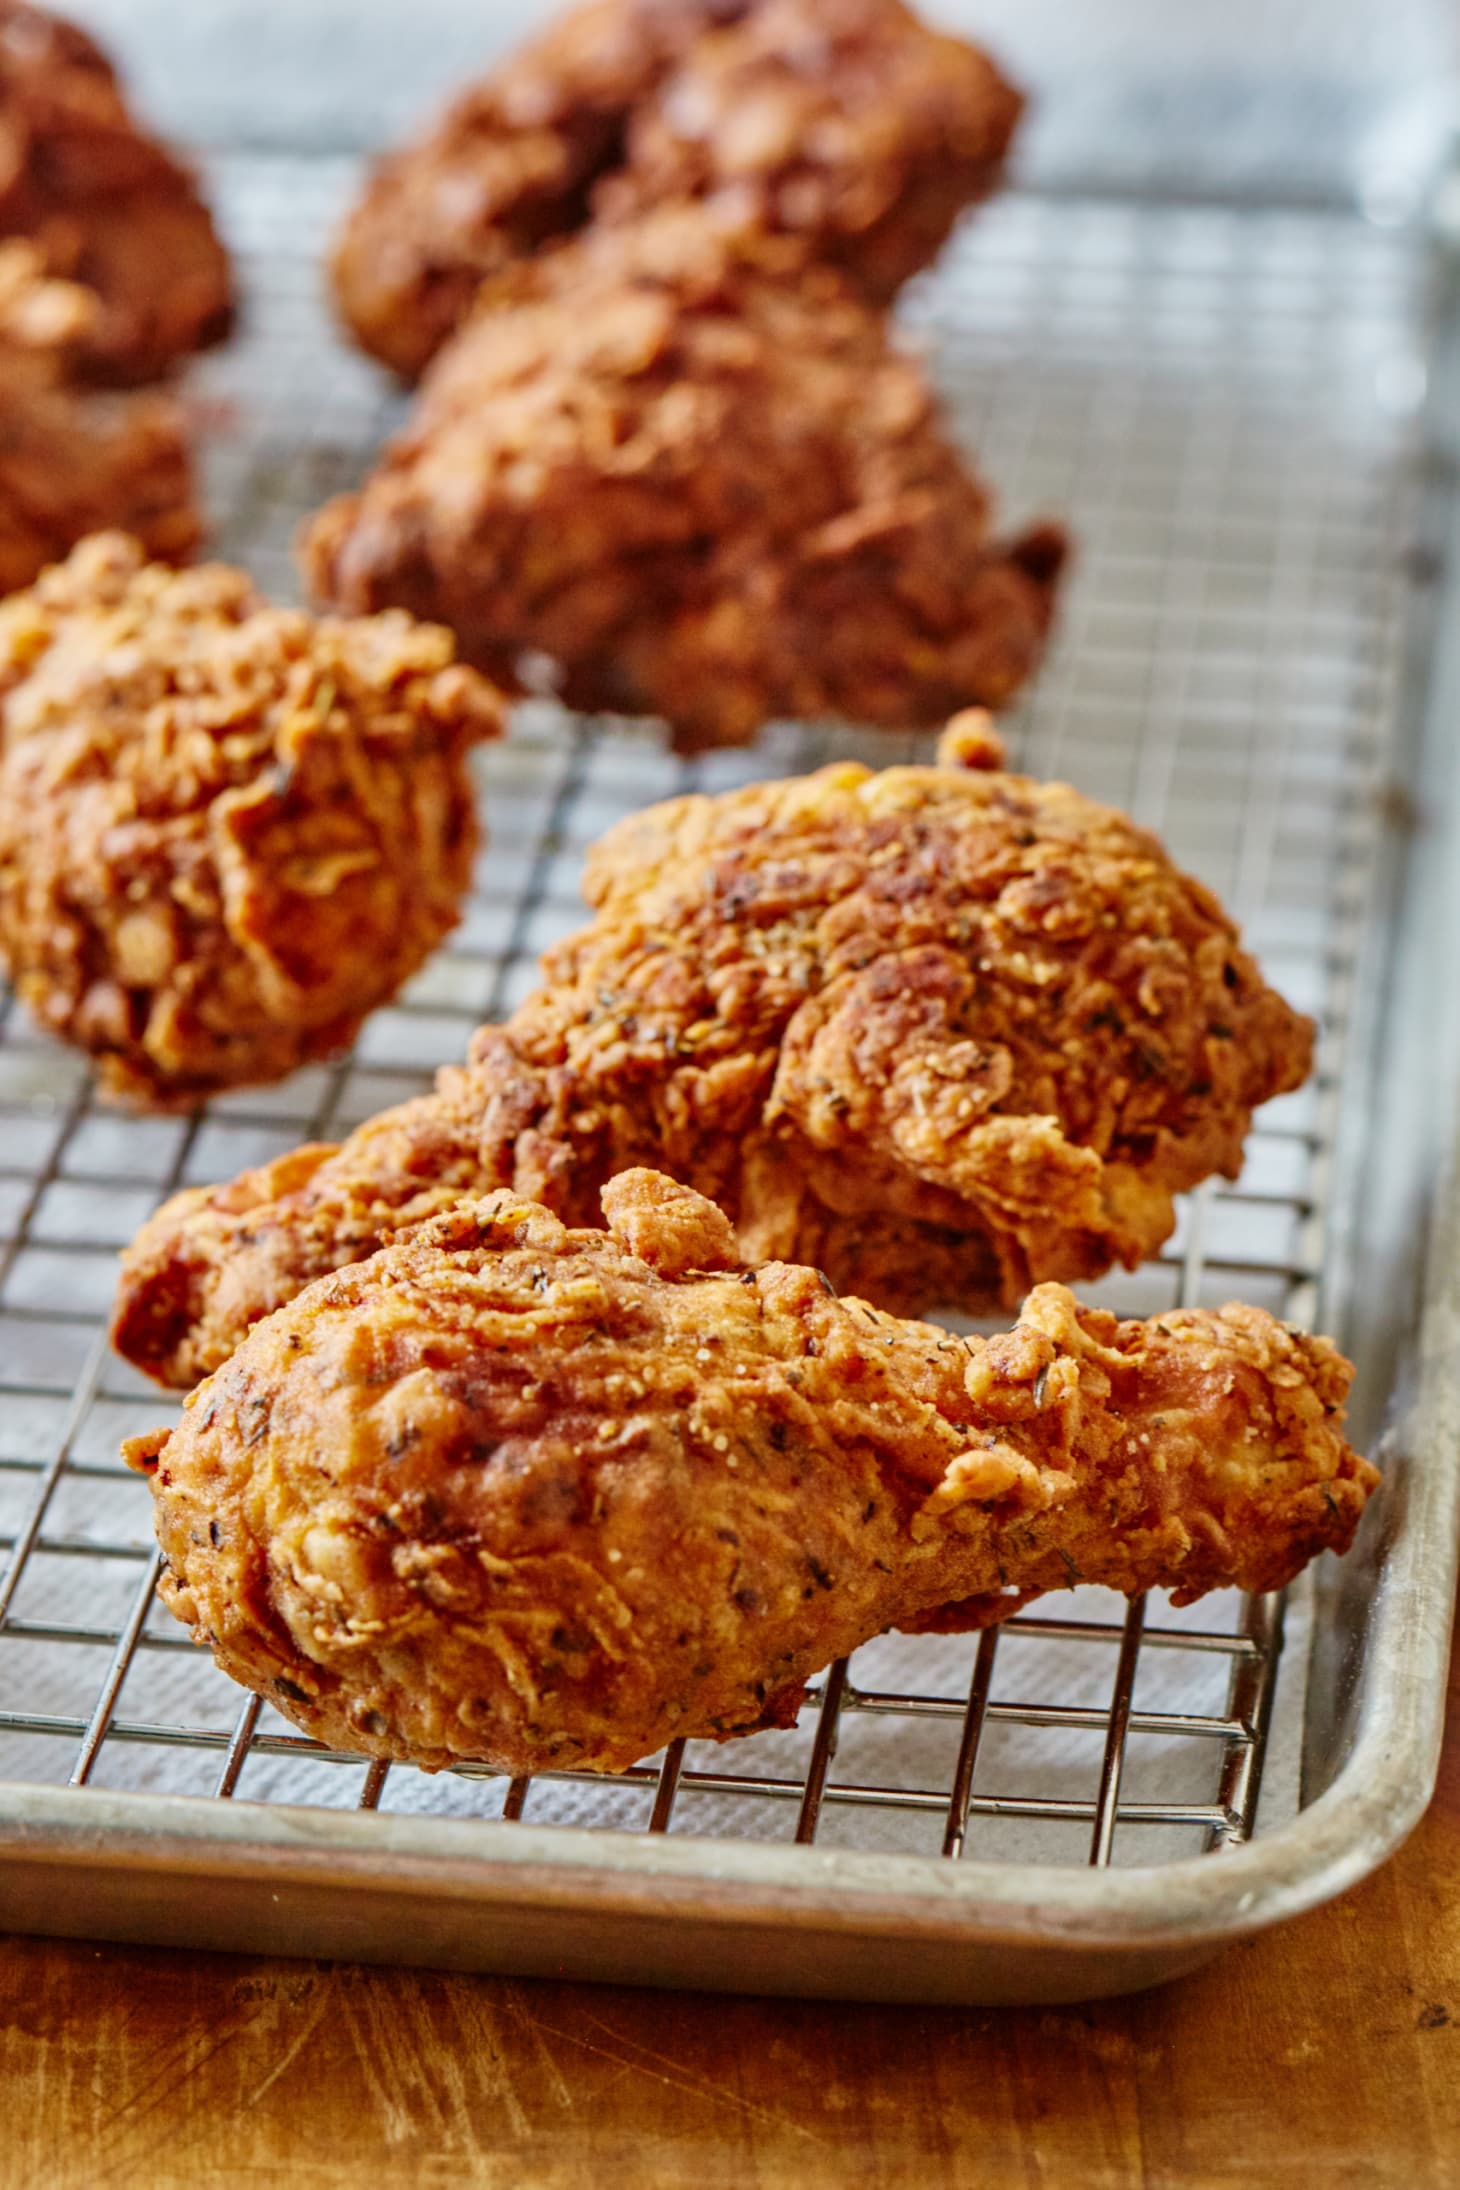 How To Make Crispy, Juicy Fried Chicken (That’s Better Than KFC) | Kitchn